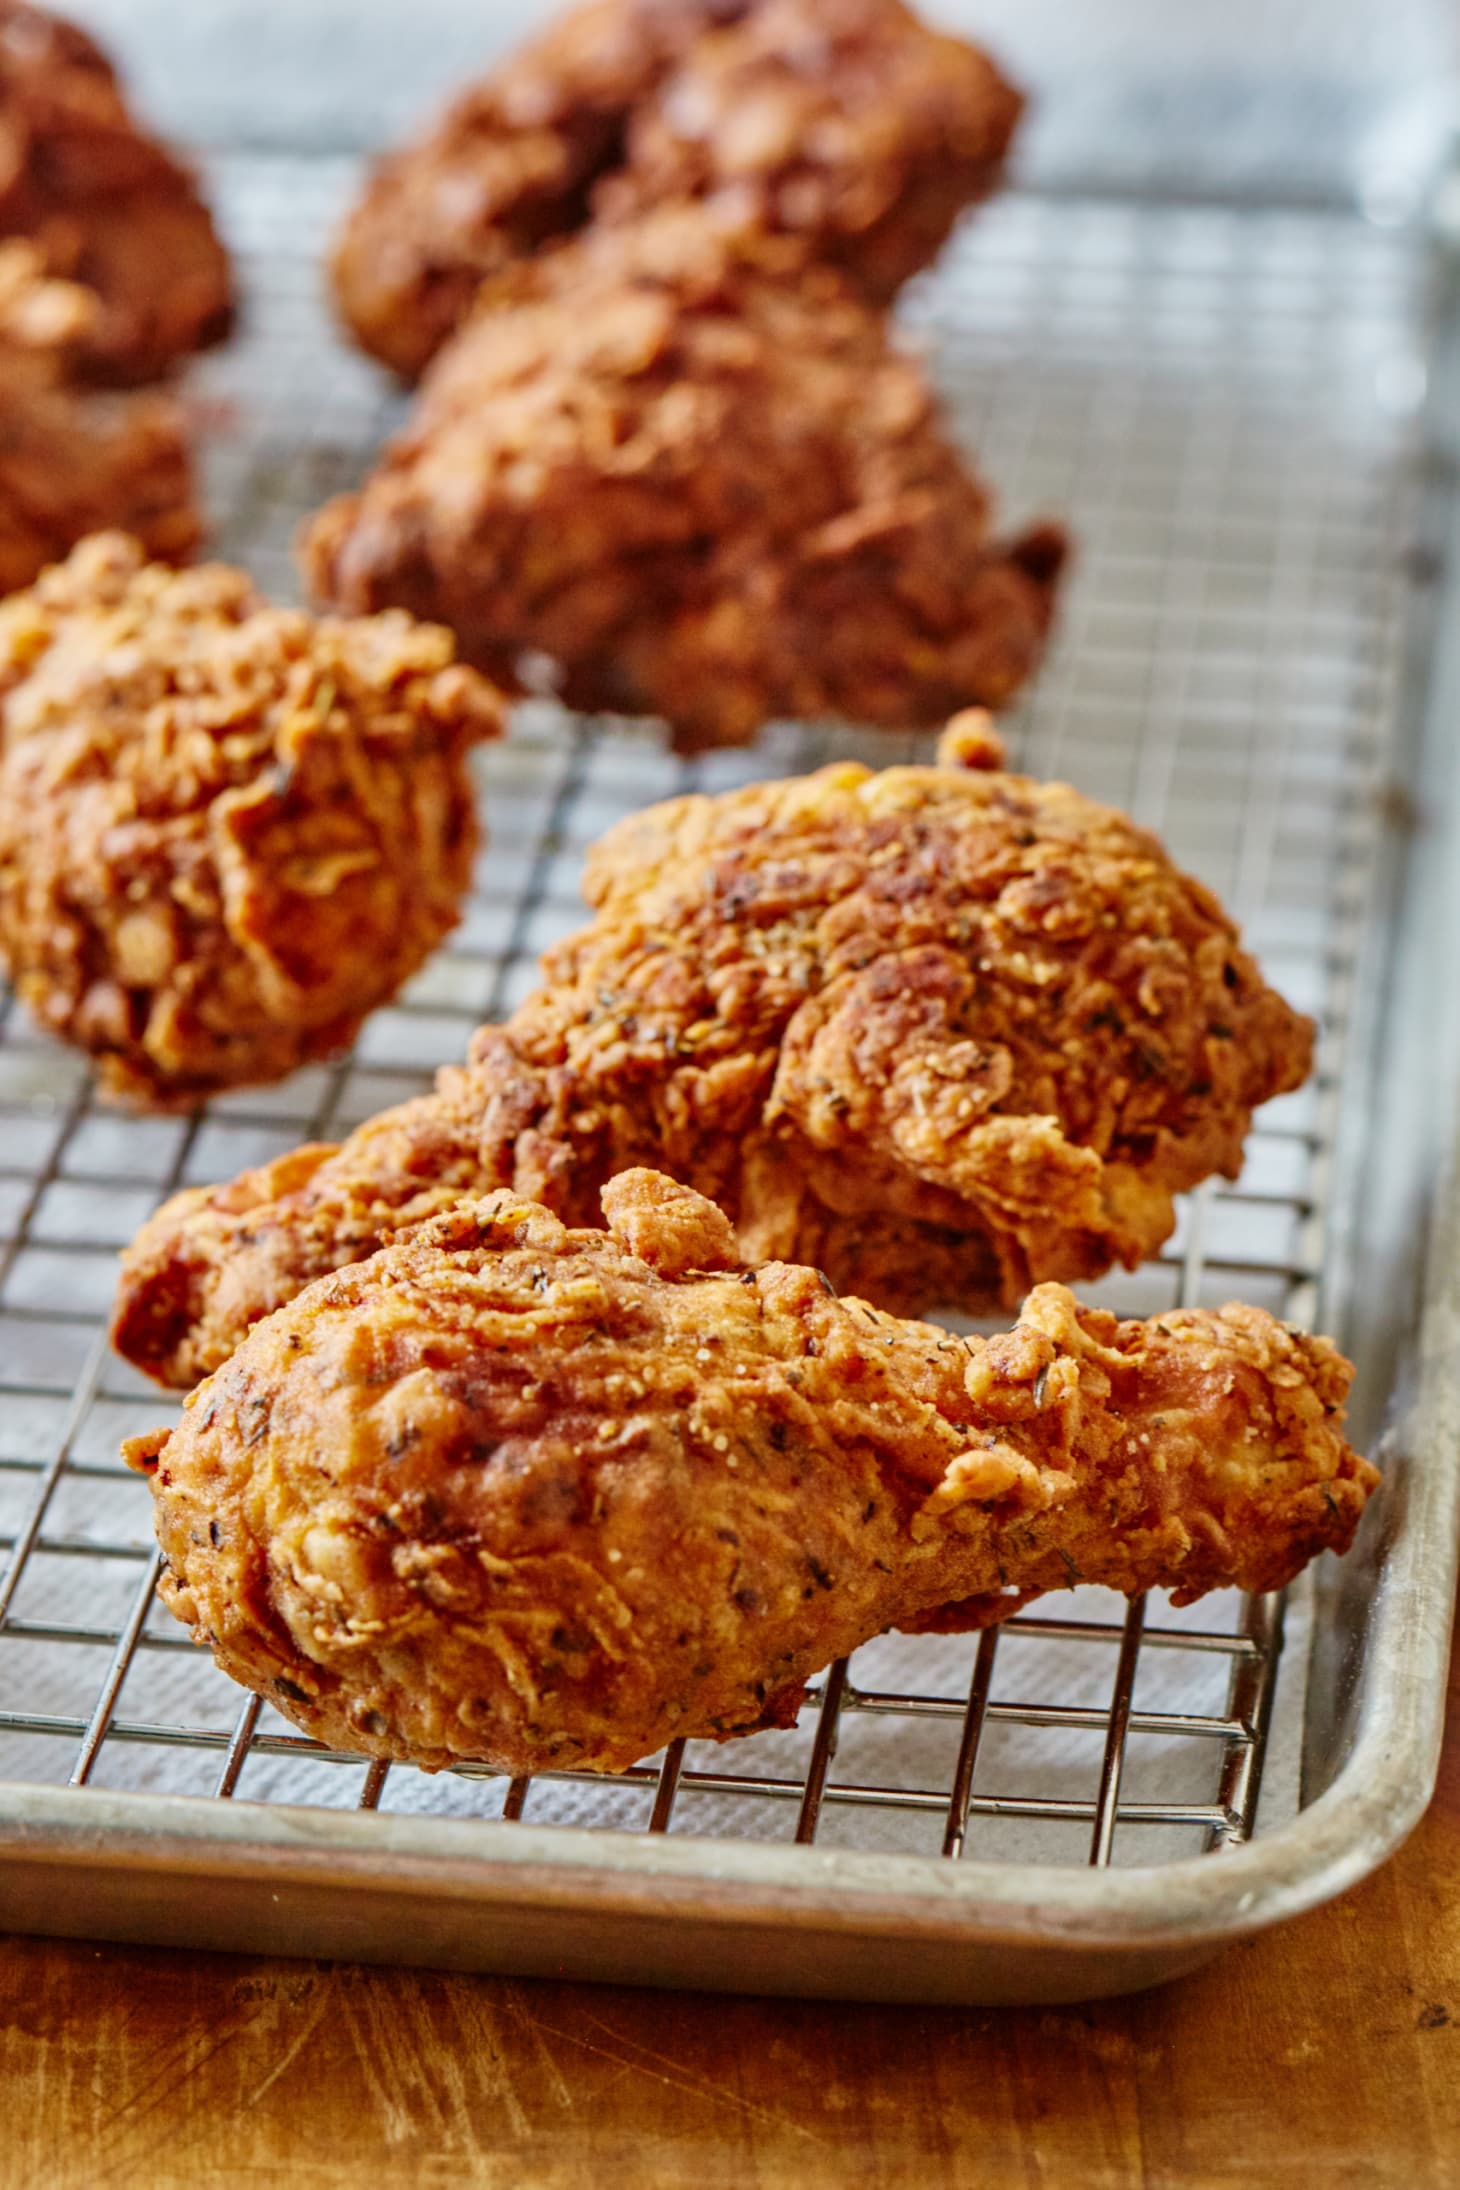 How To Make Crispy, Juicy Fried Chicken (That’s Better Than KFC) | Kitchn